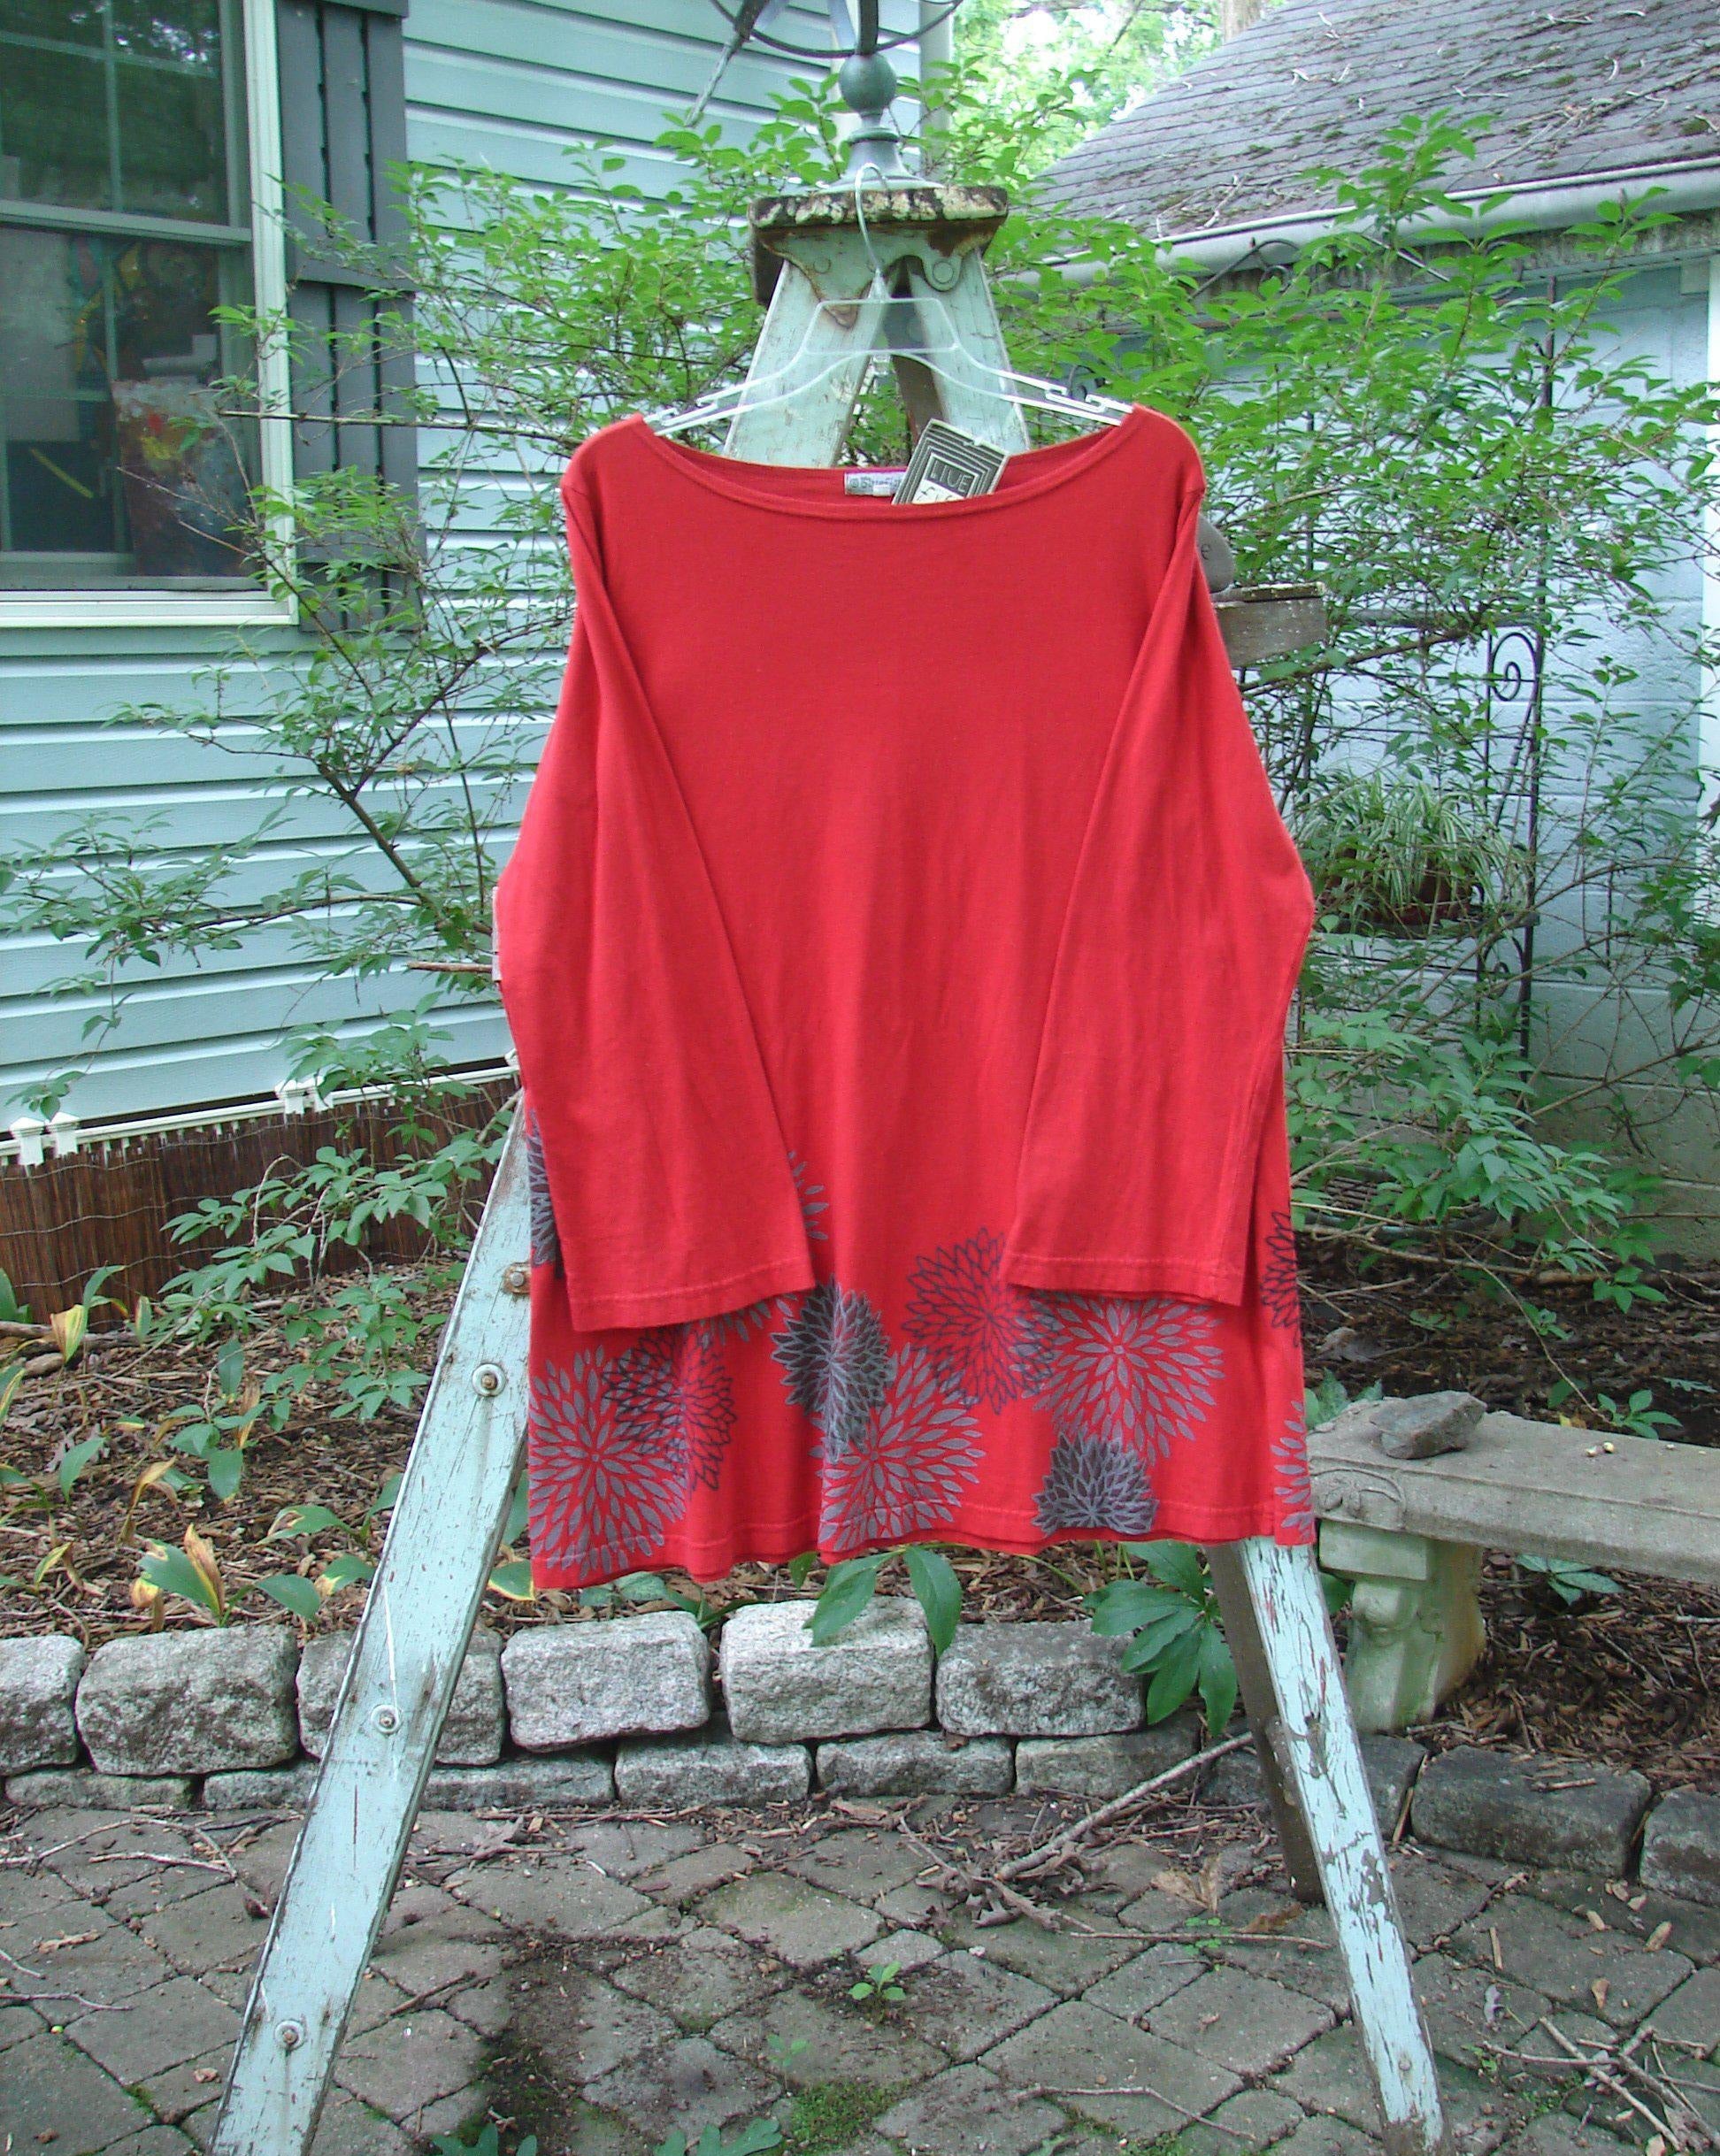 Barclay NWT Reverie Top Chrysanthemum Ruby Size 1: A red shirt with a chrysanthemum pattern on a clothes line.